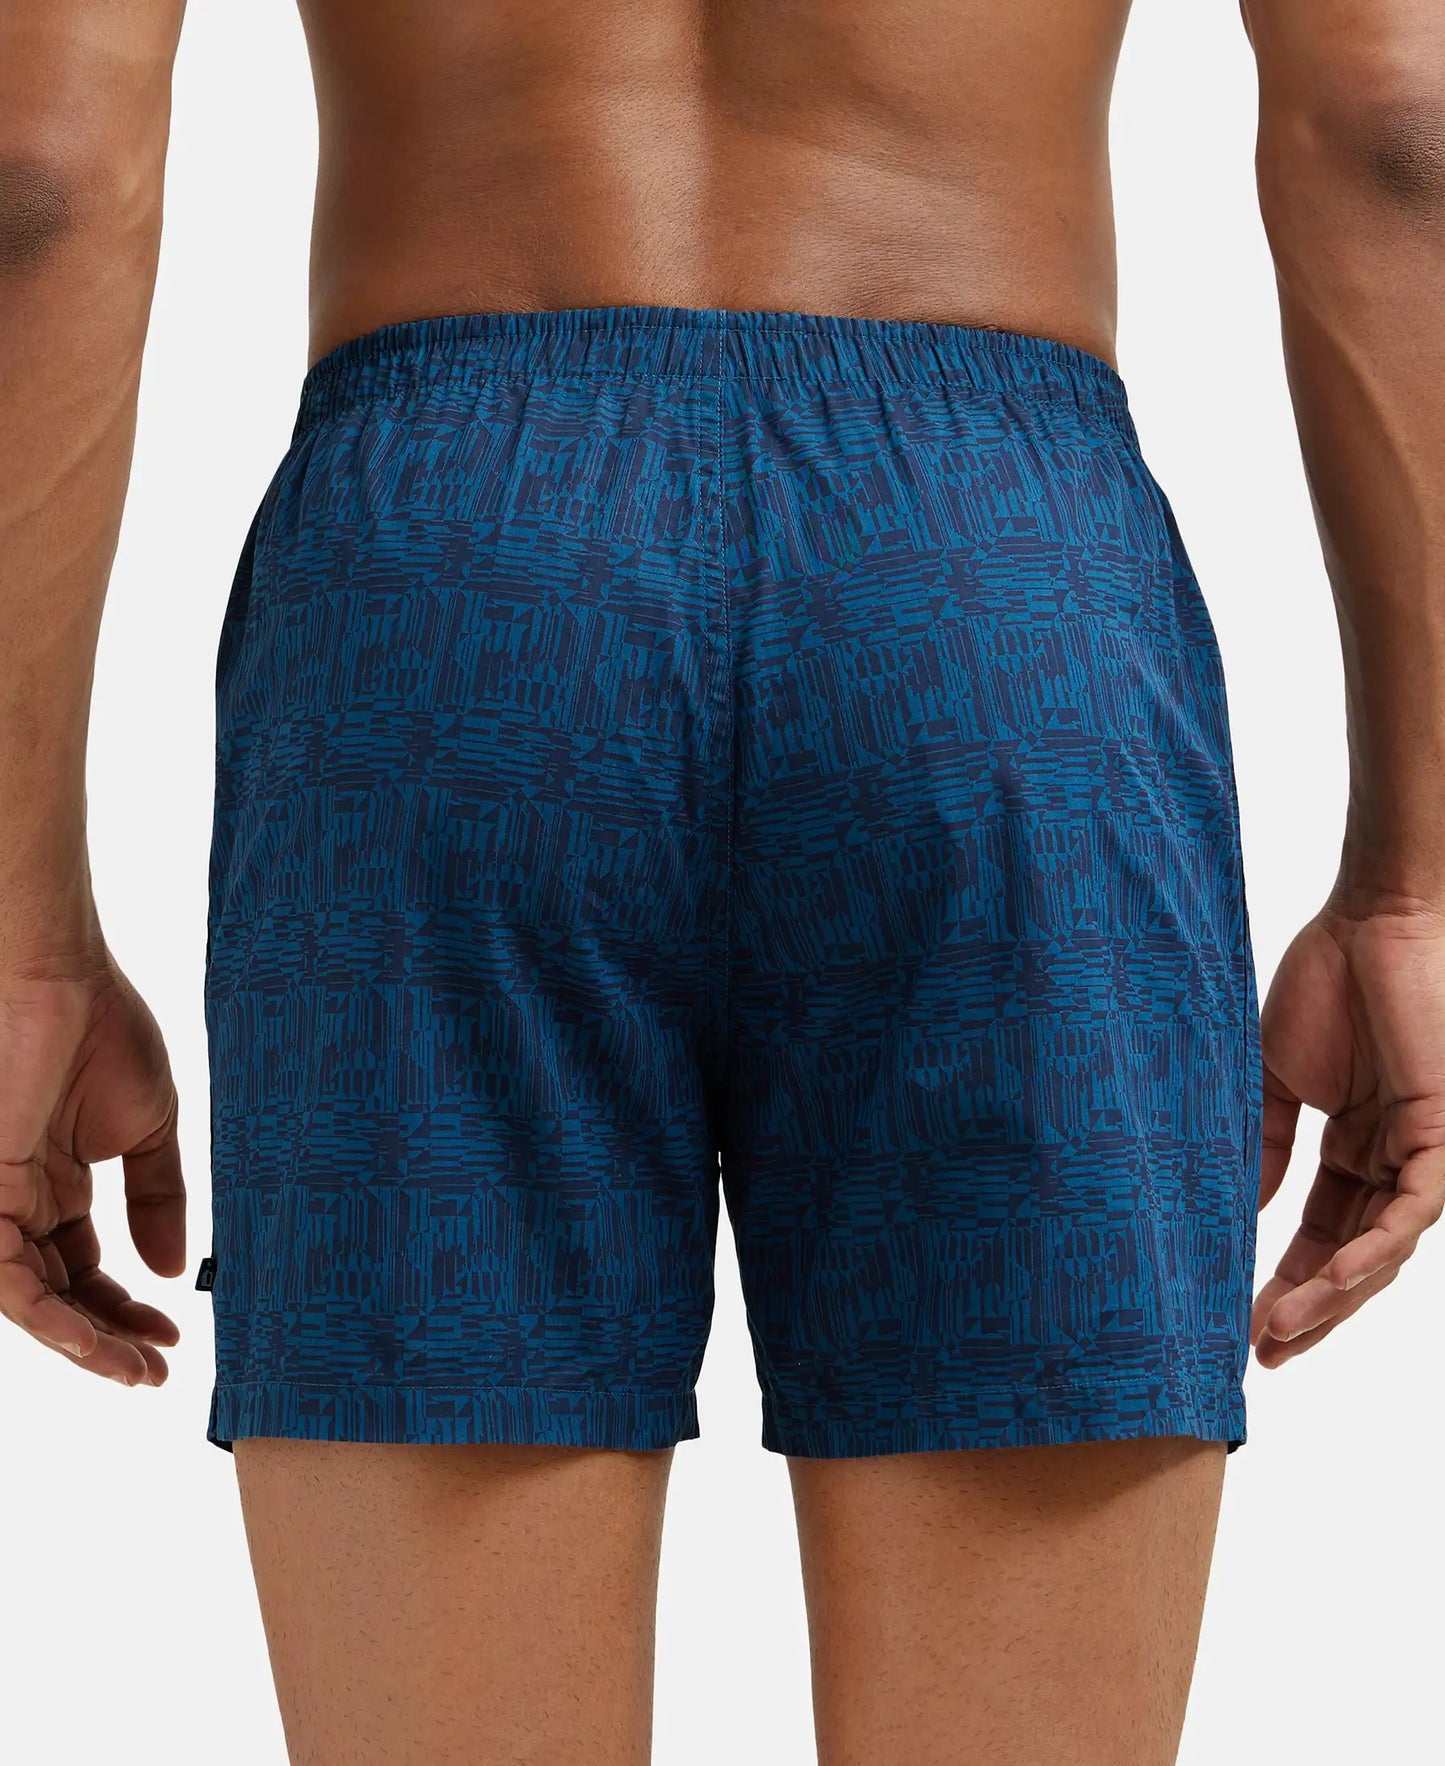 Super Combed Mercerized Cotton Woven Checkered Inner Boxers with Ultrasoft and Durable Inner Waistband - Mauve Wine & Seaport Teal-6